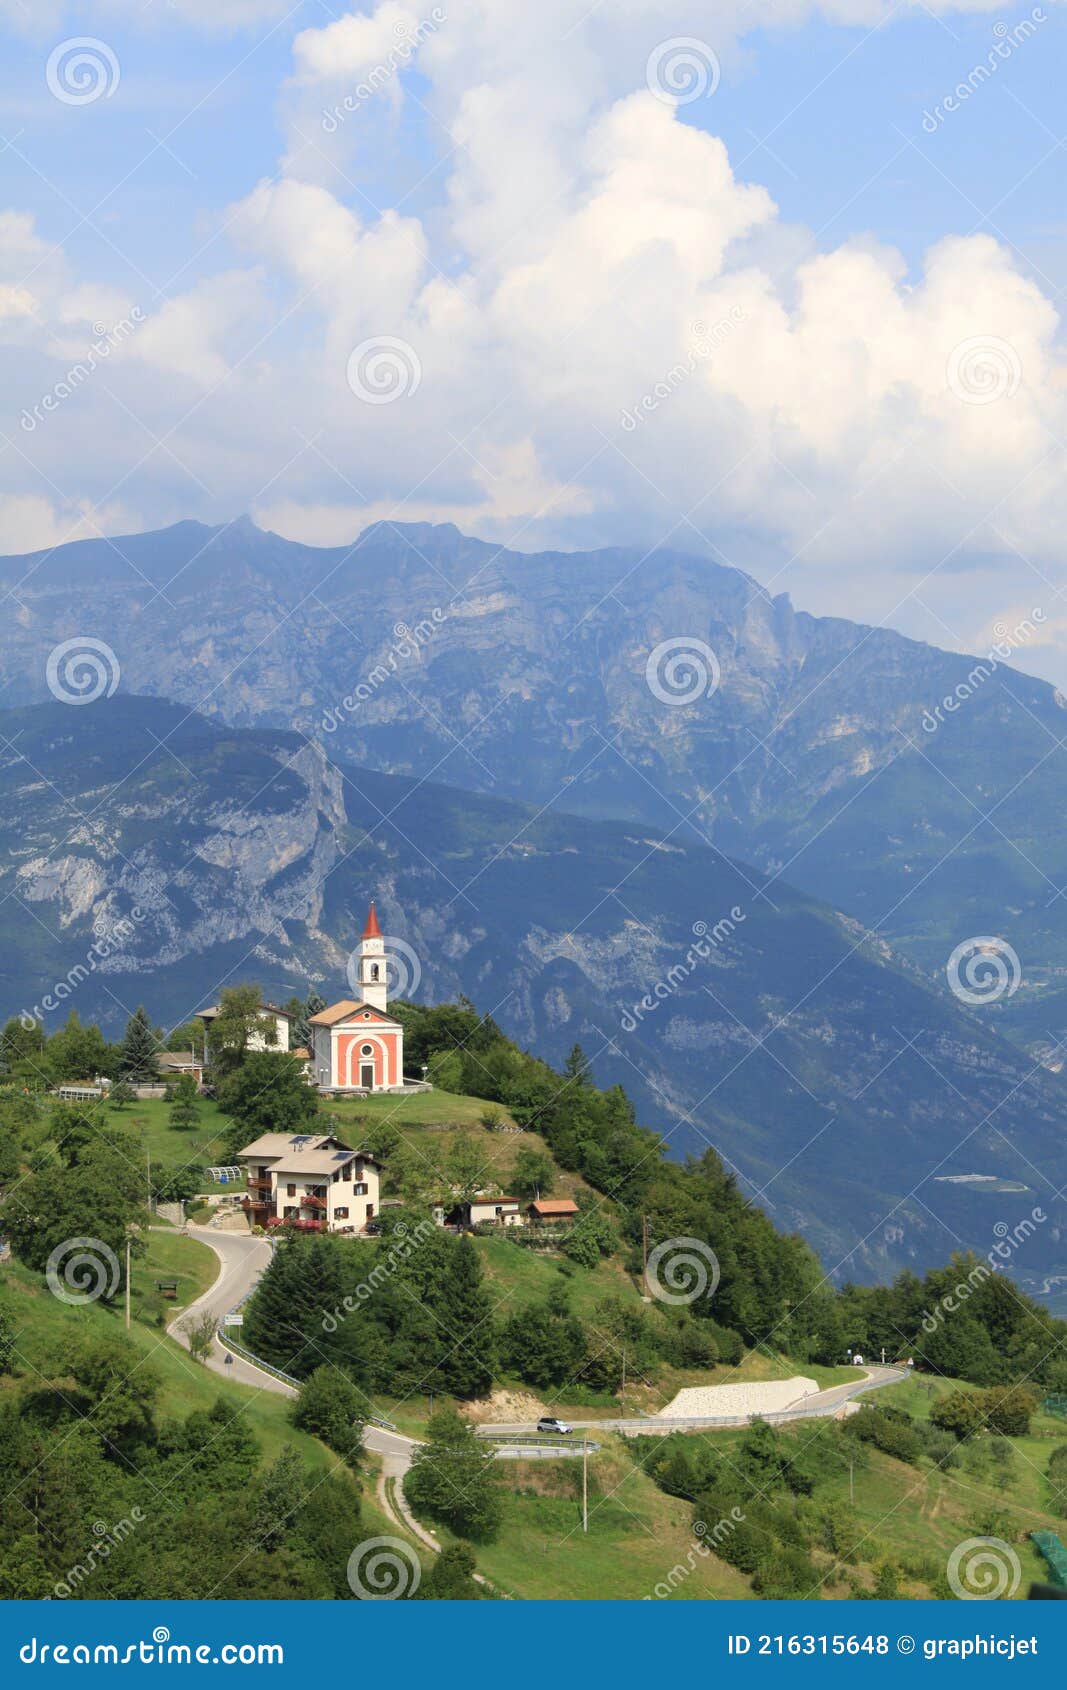 mountain landscape with a small red church in guardia, trentino, italy